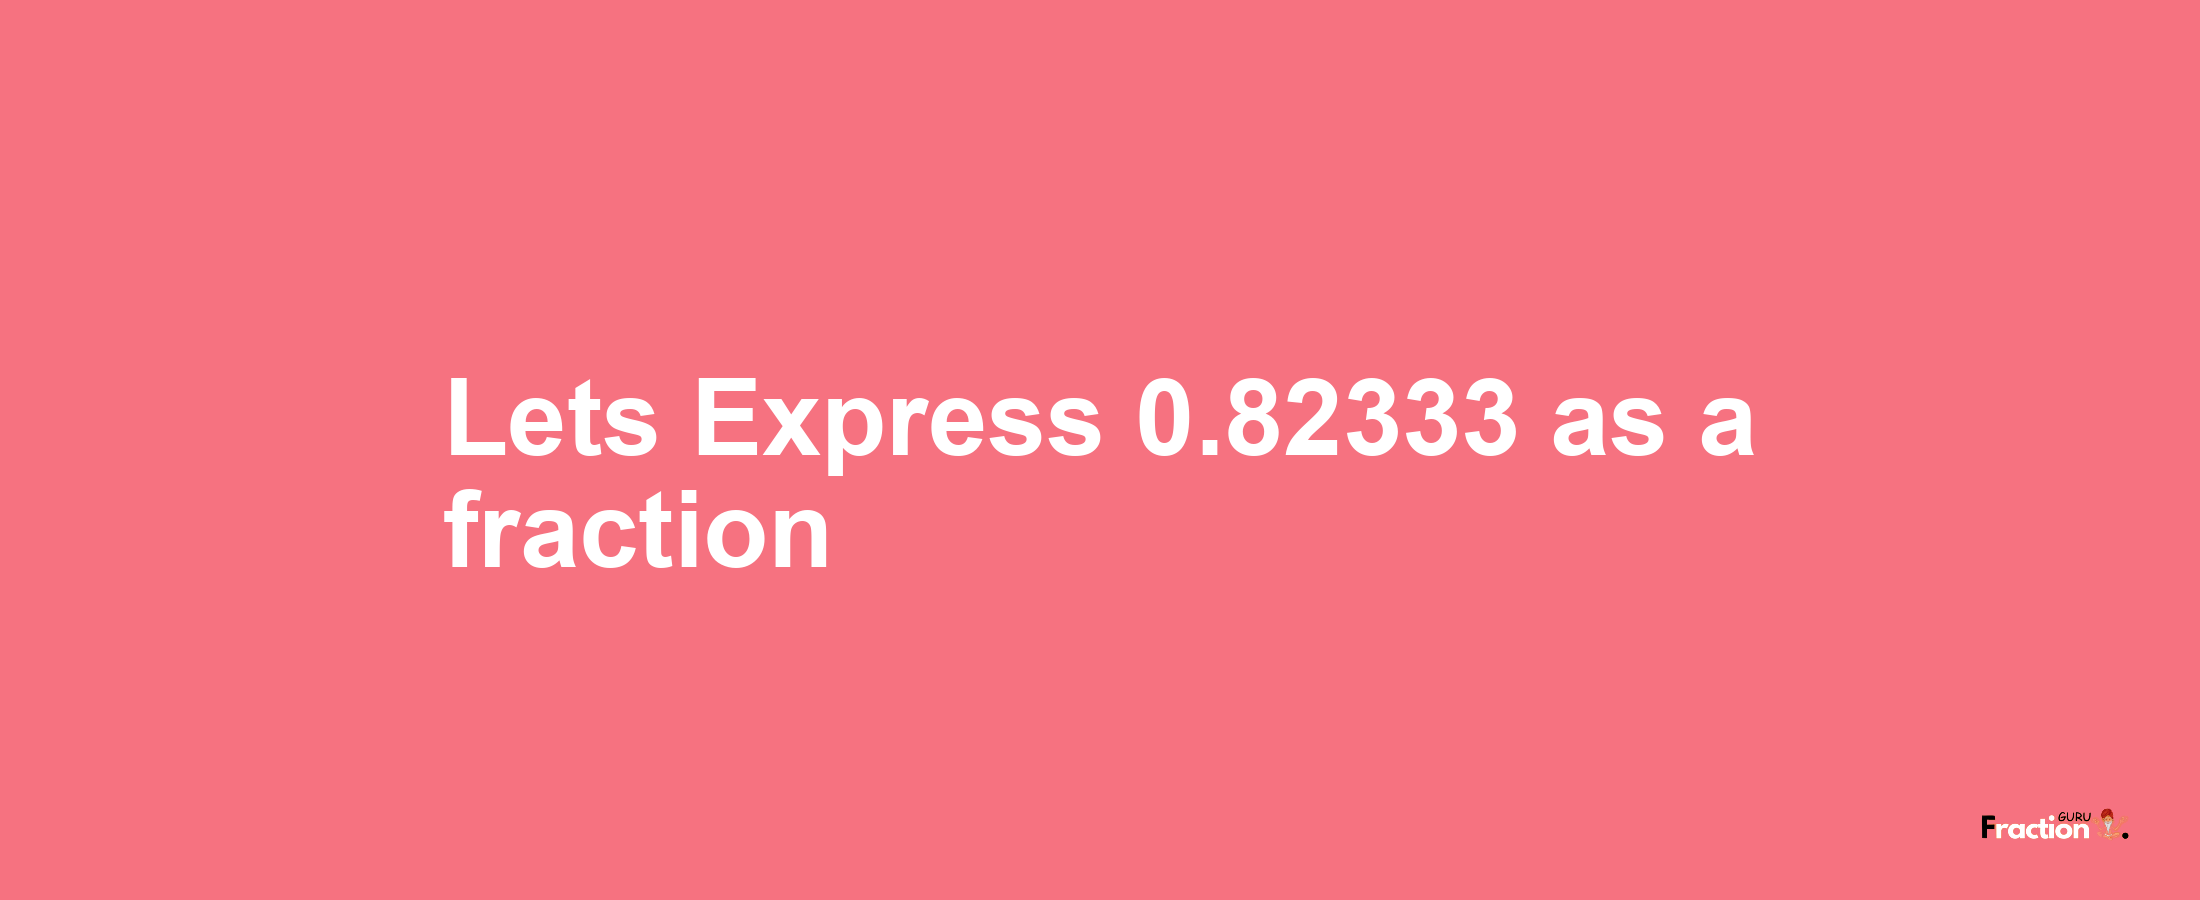 Lets Express 0.82333 as afraction